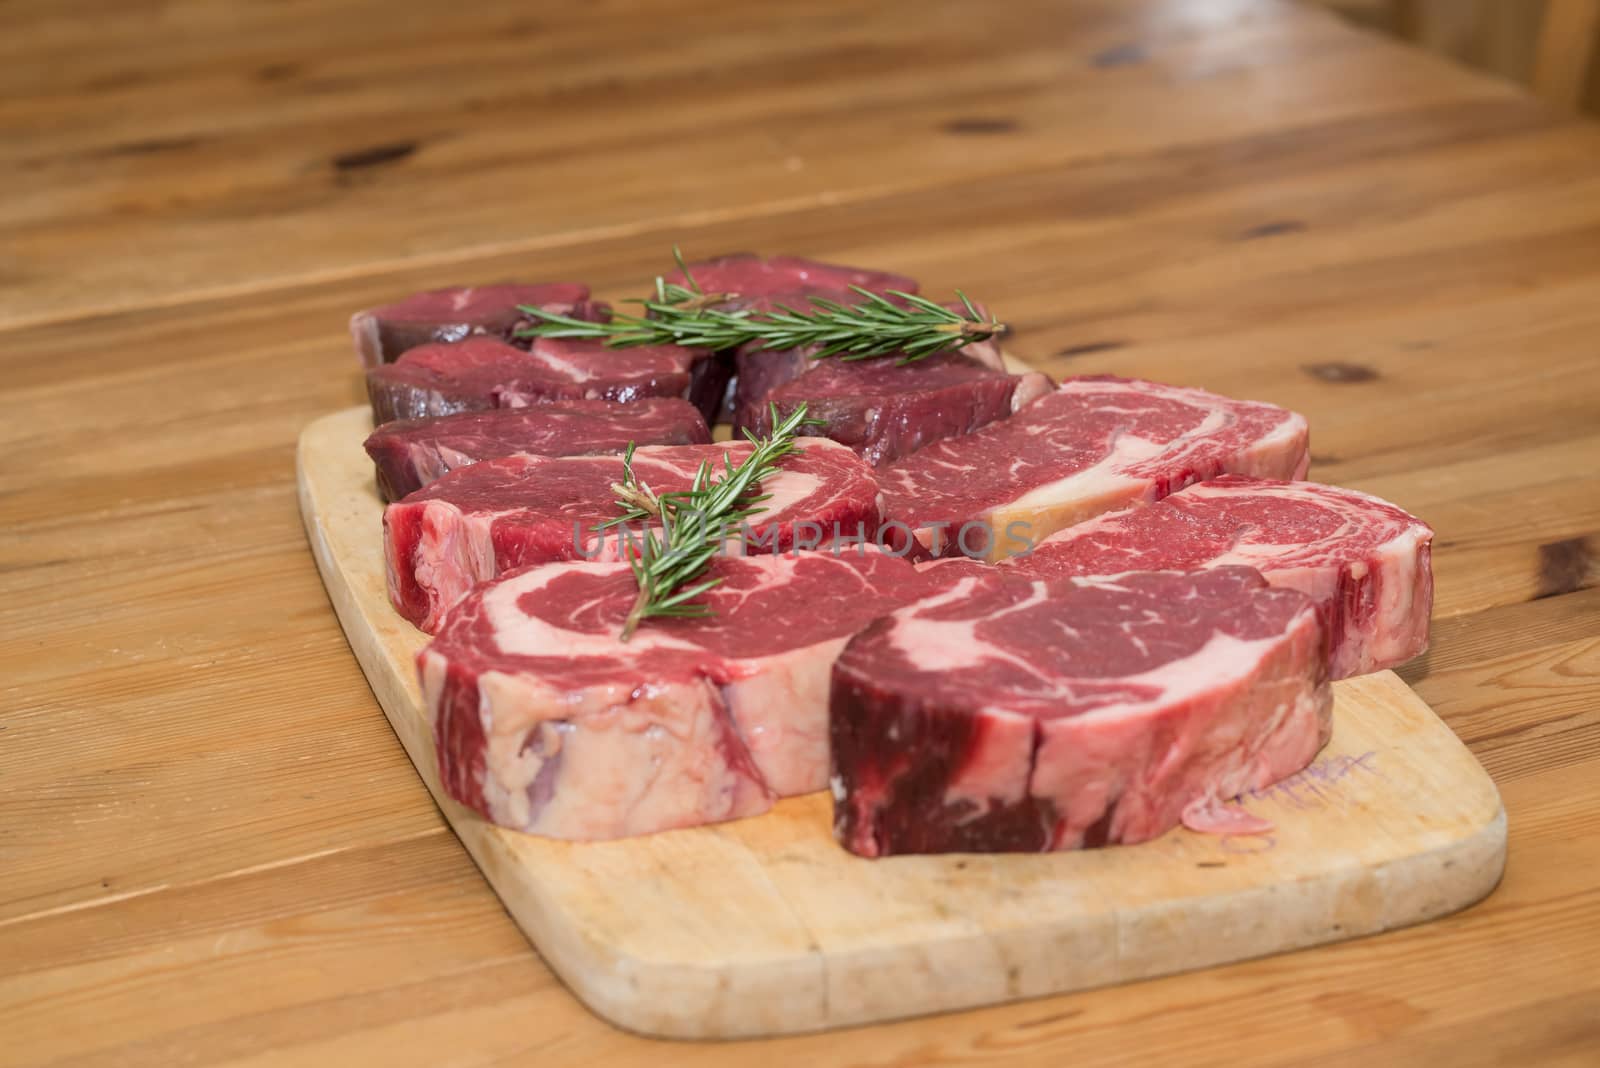 Raw steaks on a cutting board garnished with herbs